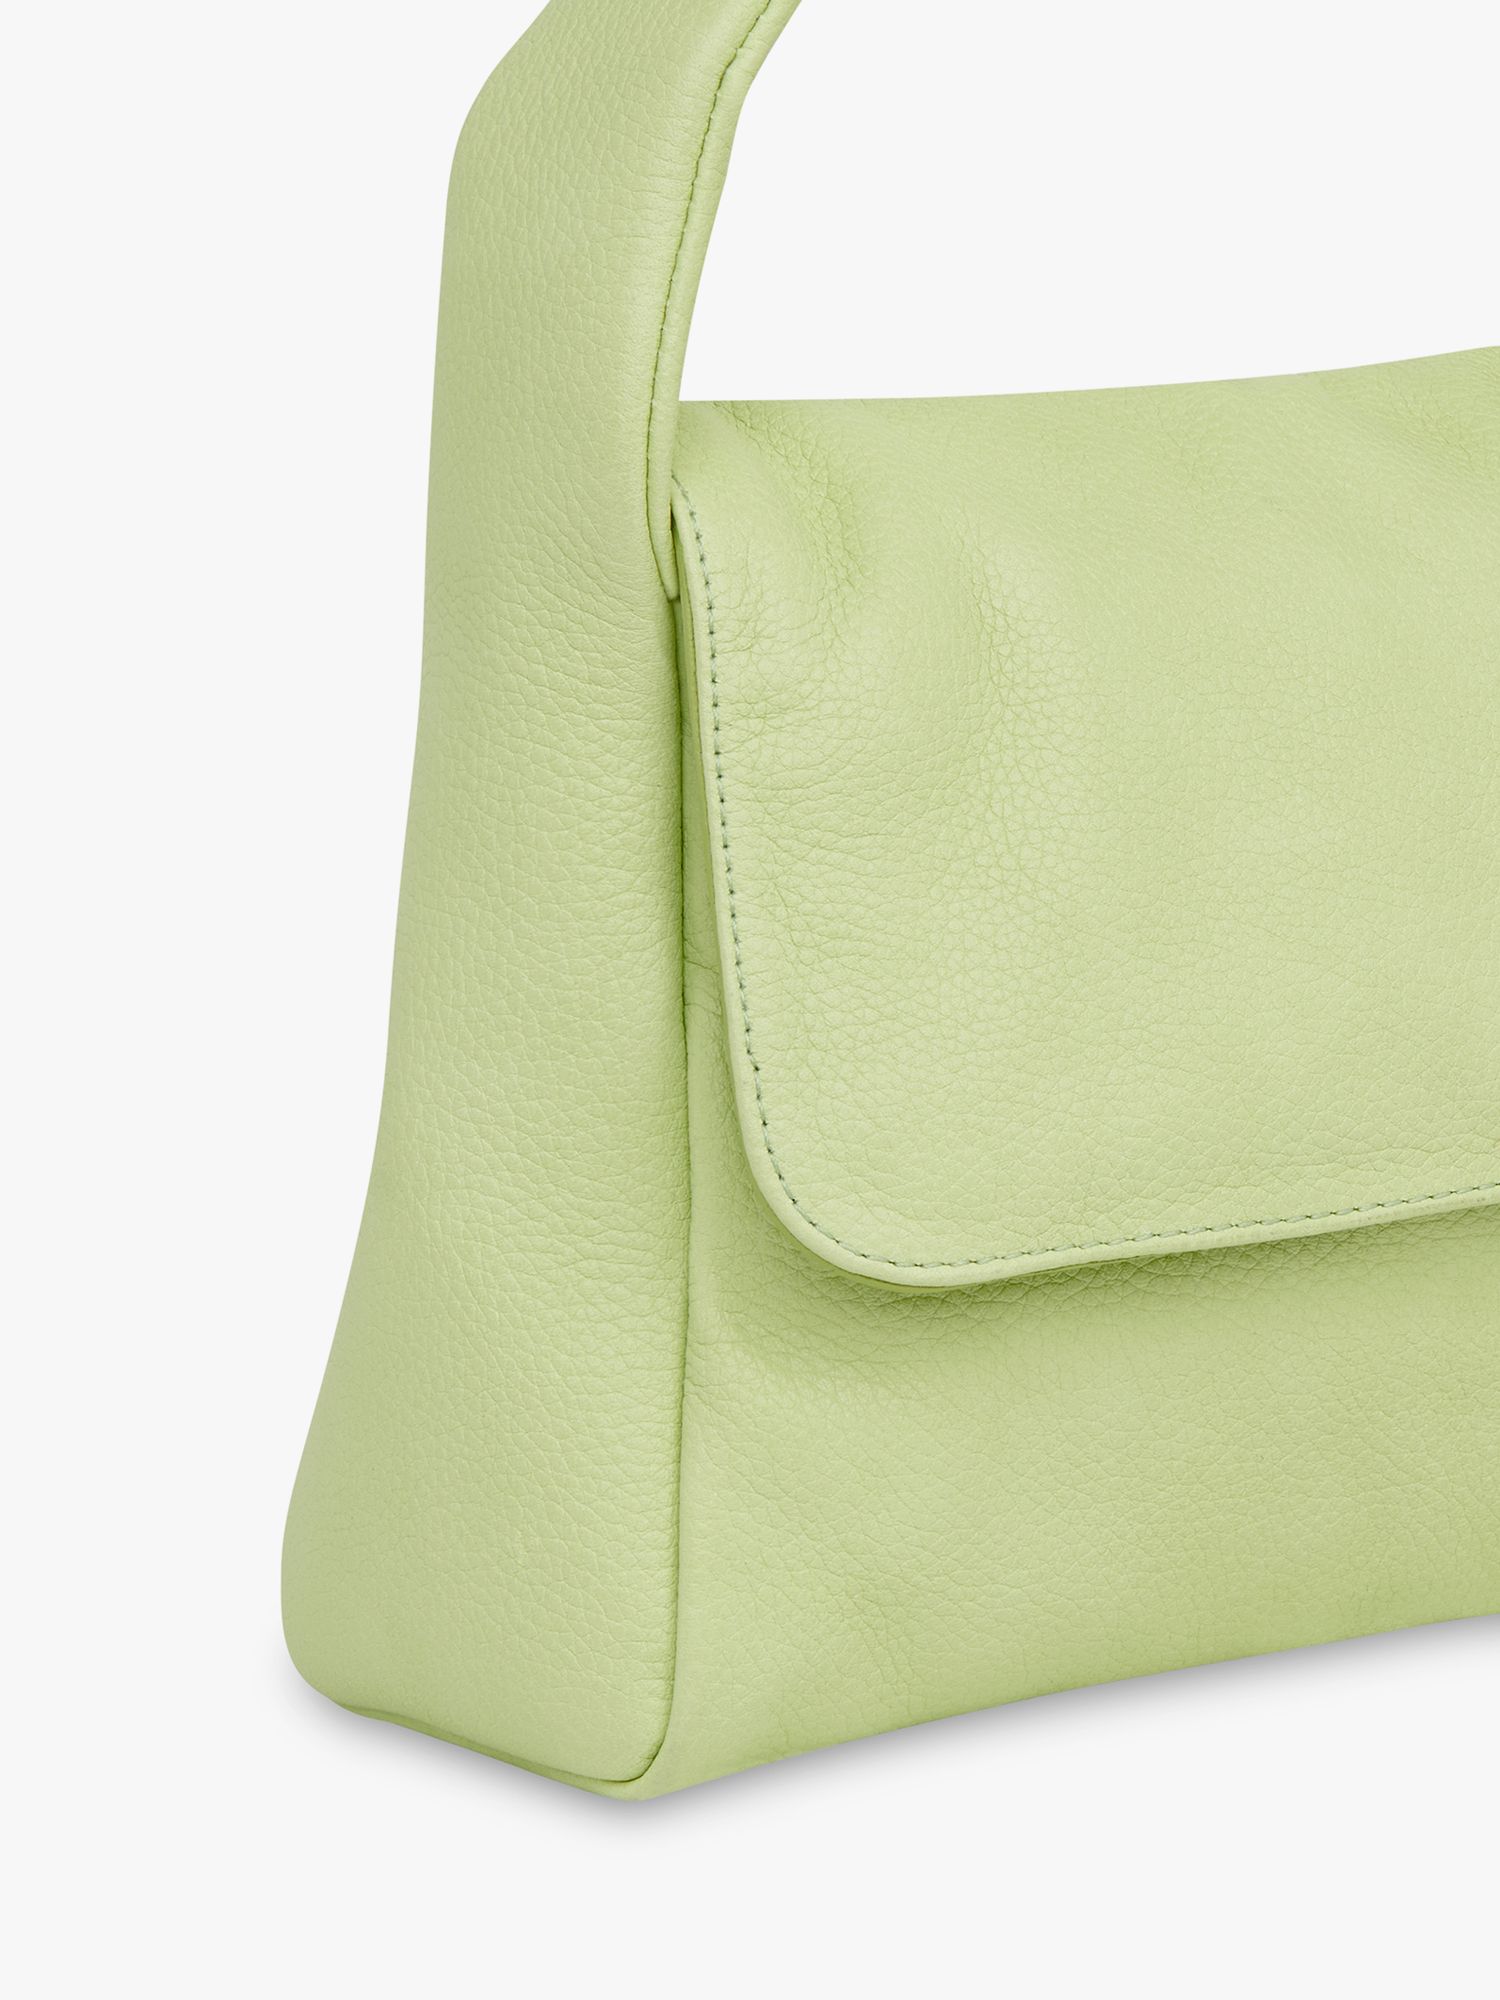 Whistles Brooke Puffy Leather Mini Bag, Lime, One Size